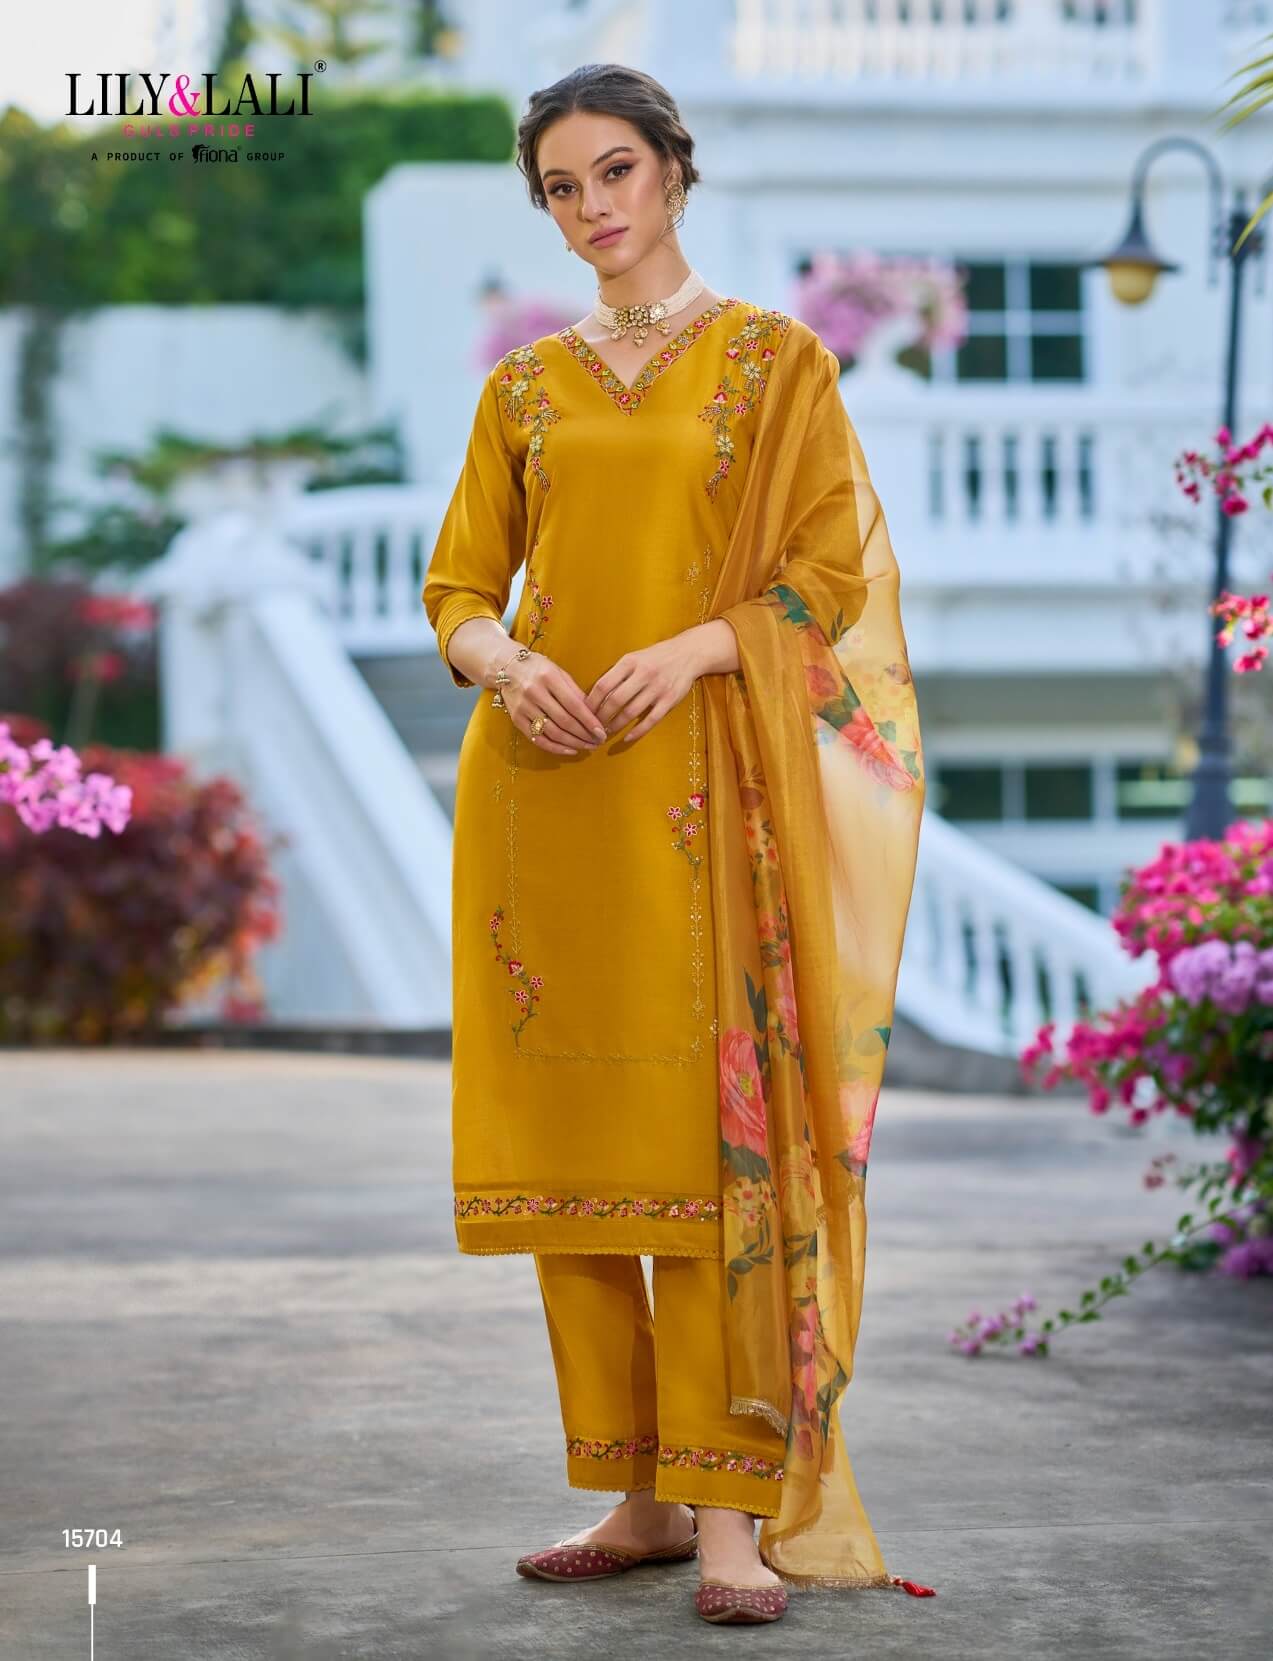 Lily And Lali Falak Embroidery Salwar Kameez Catalog collection 3